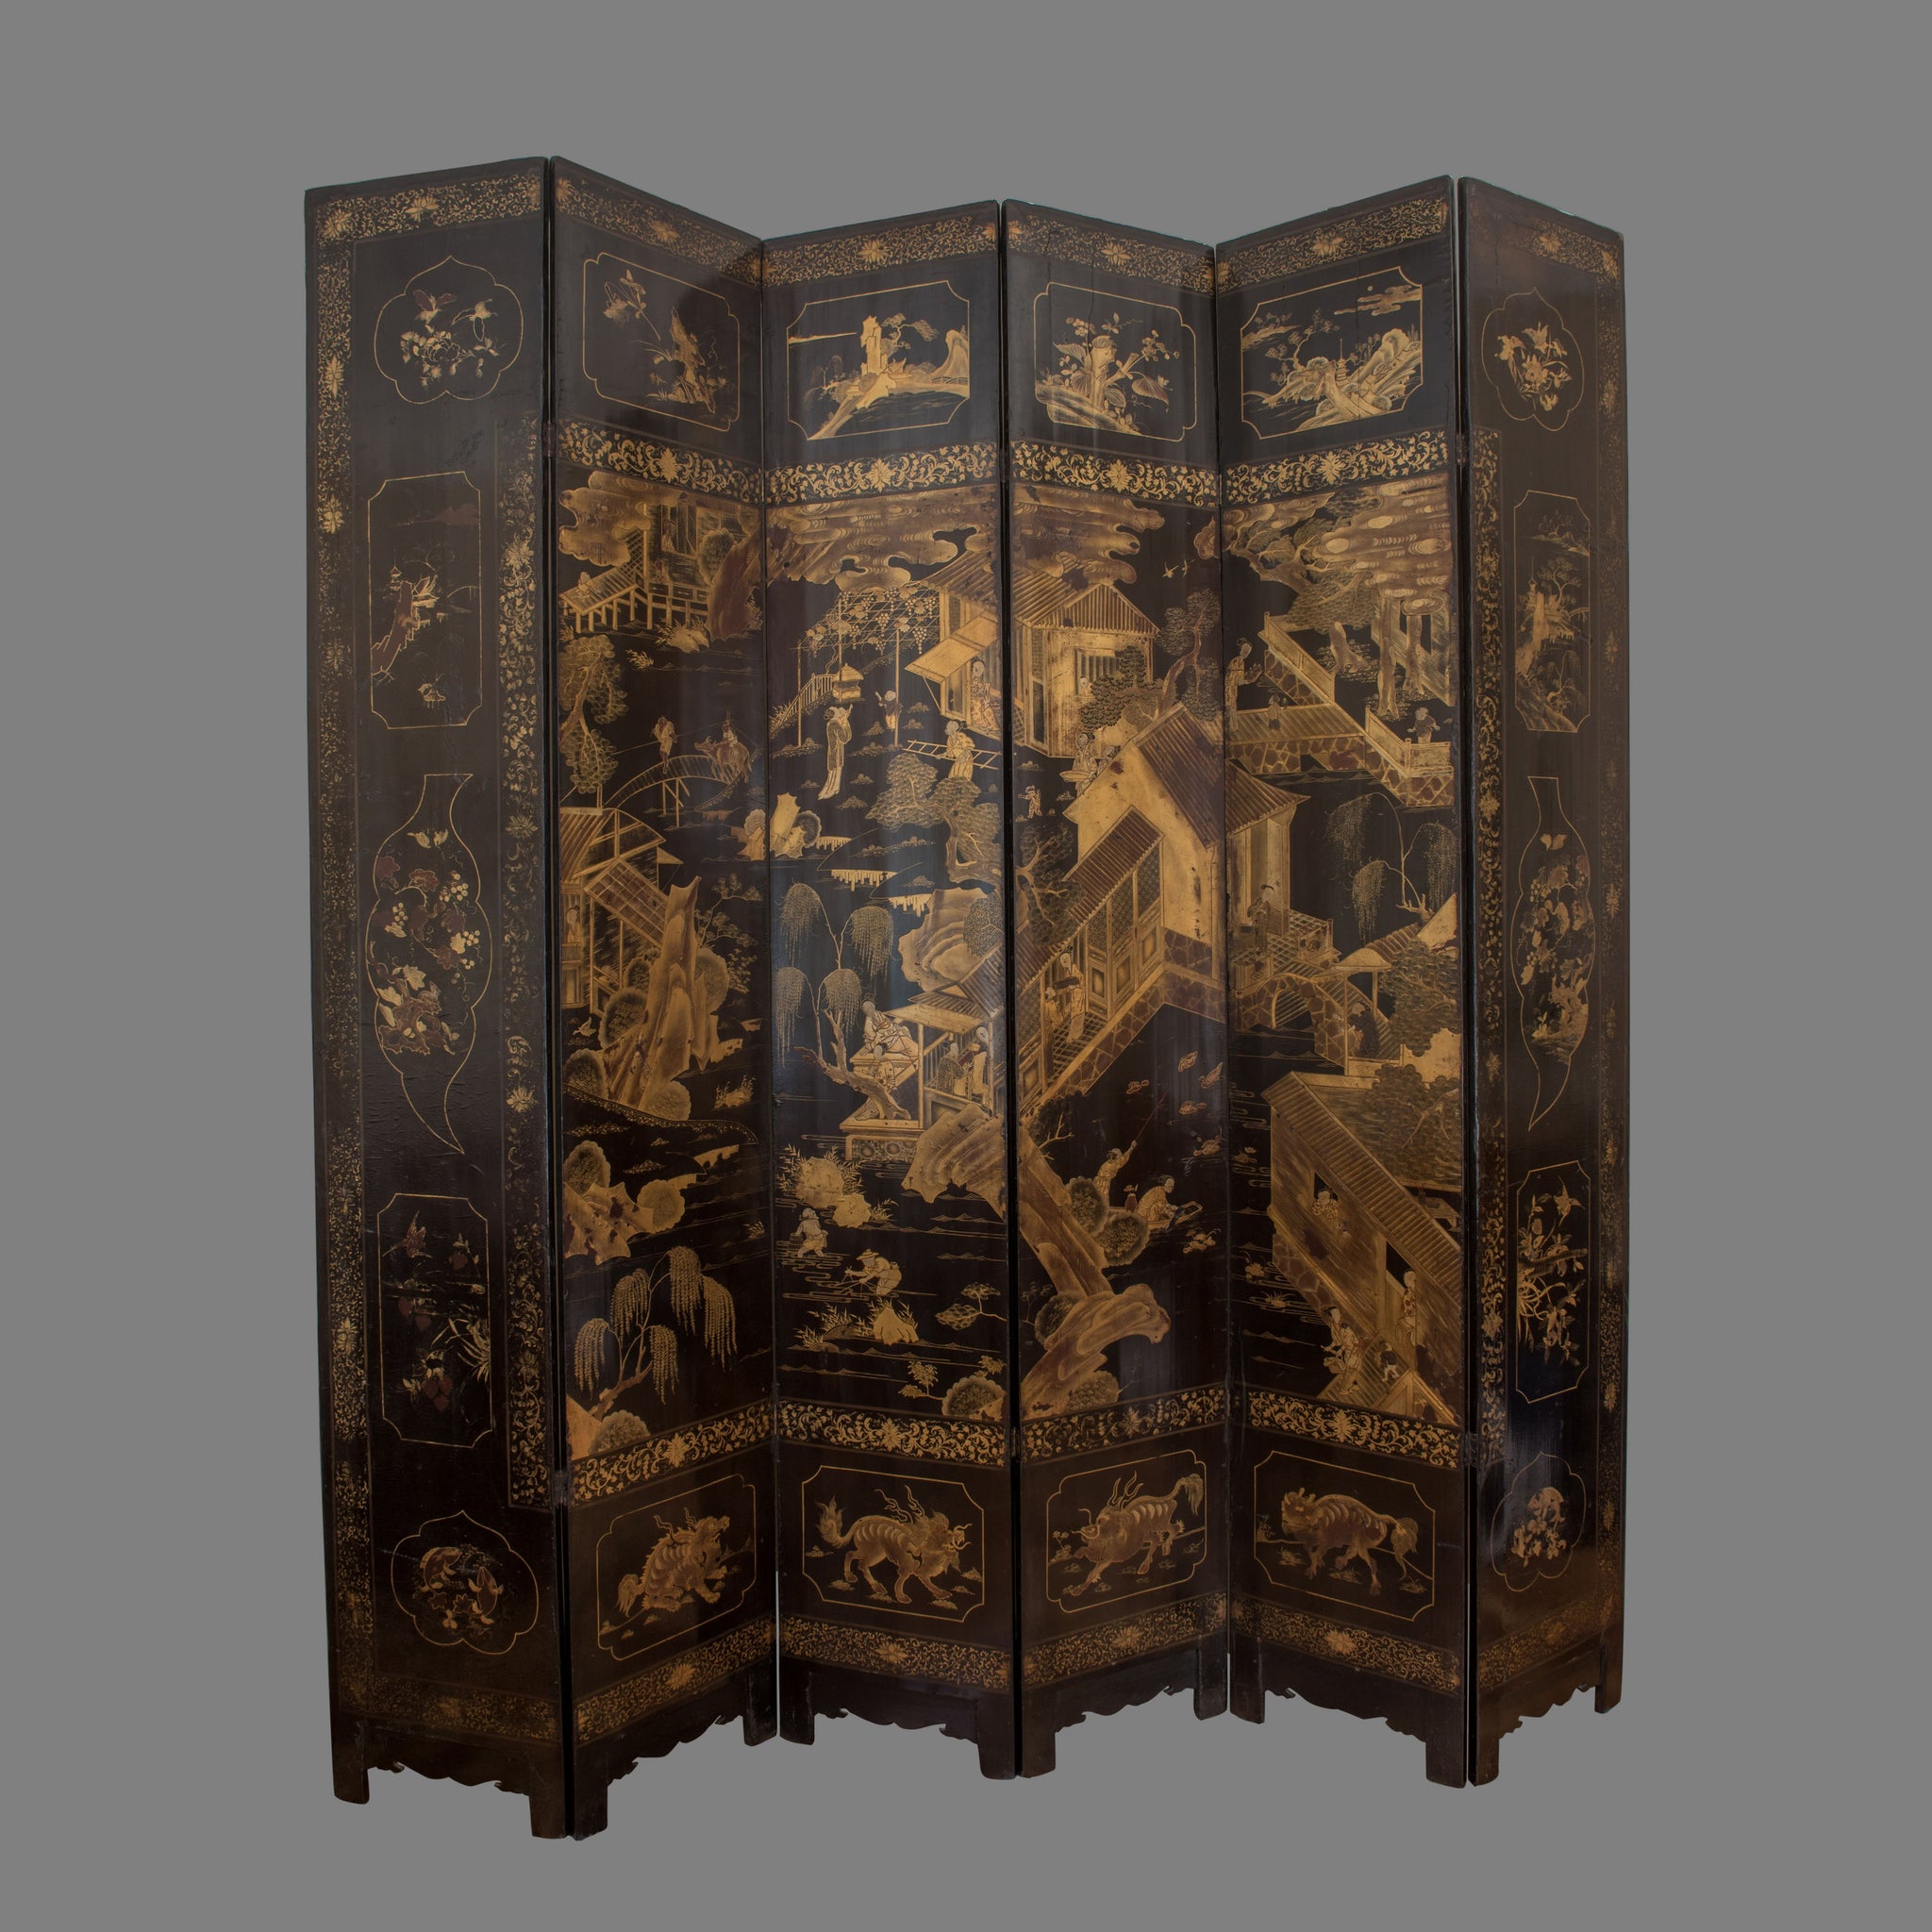 The 'Yale' 18th Century Chinese Screen